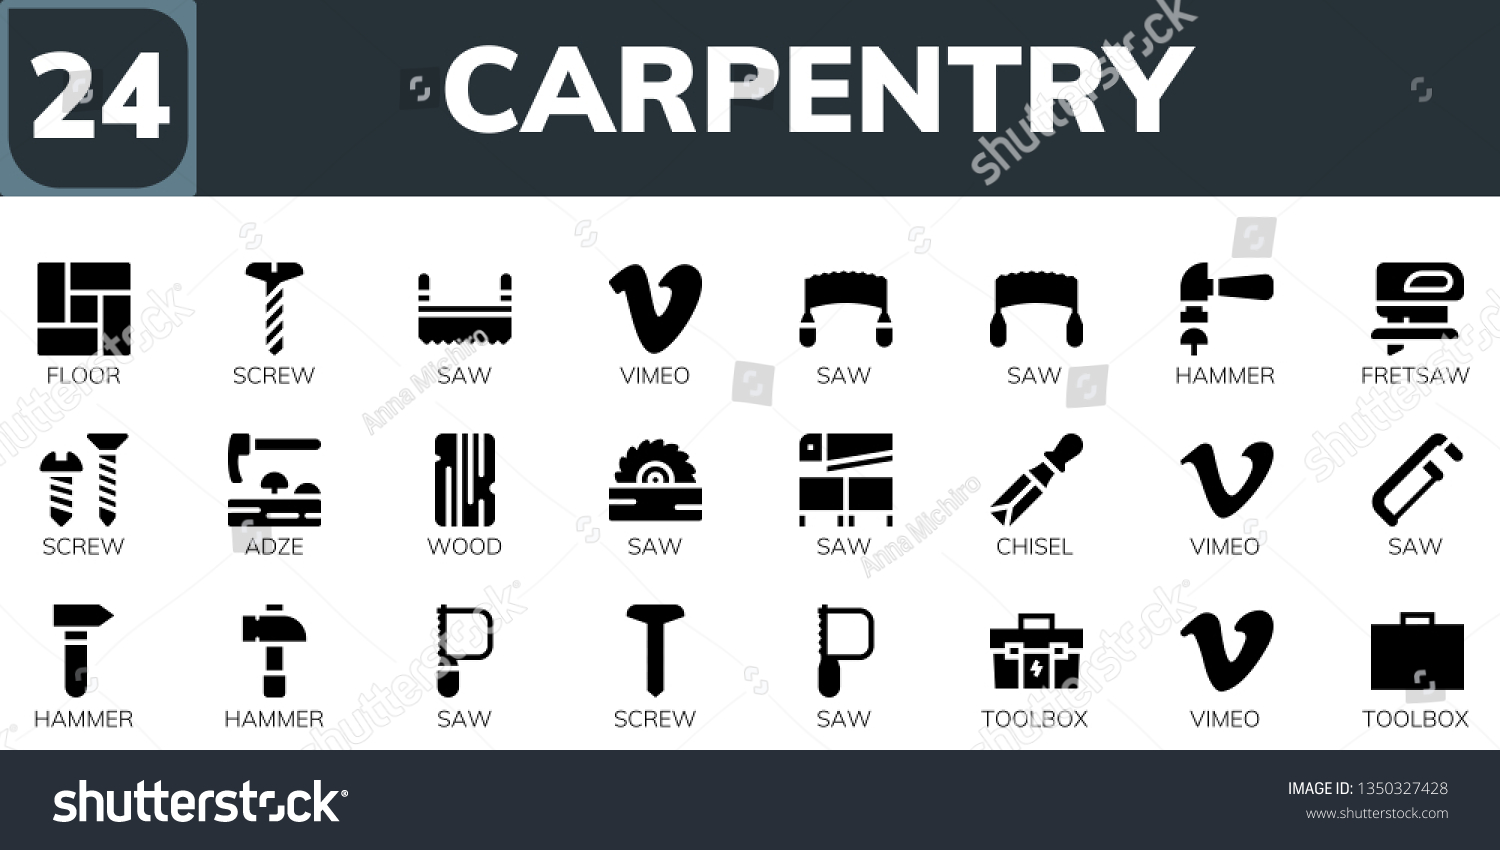 SVG of carpentry icon set. 24 filled carpentry icons.  Collection Of - Floor, Screw, Saw, Vimeo, Hammer, Fretsaw, Adze, Wood, Chisel, Toolbox svg